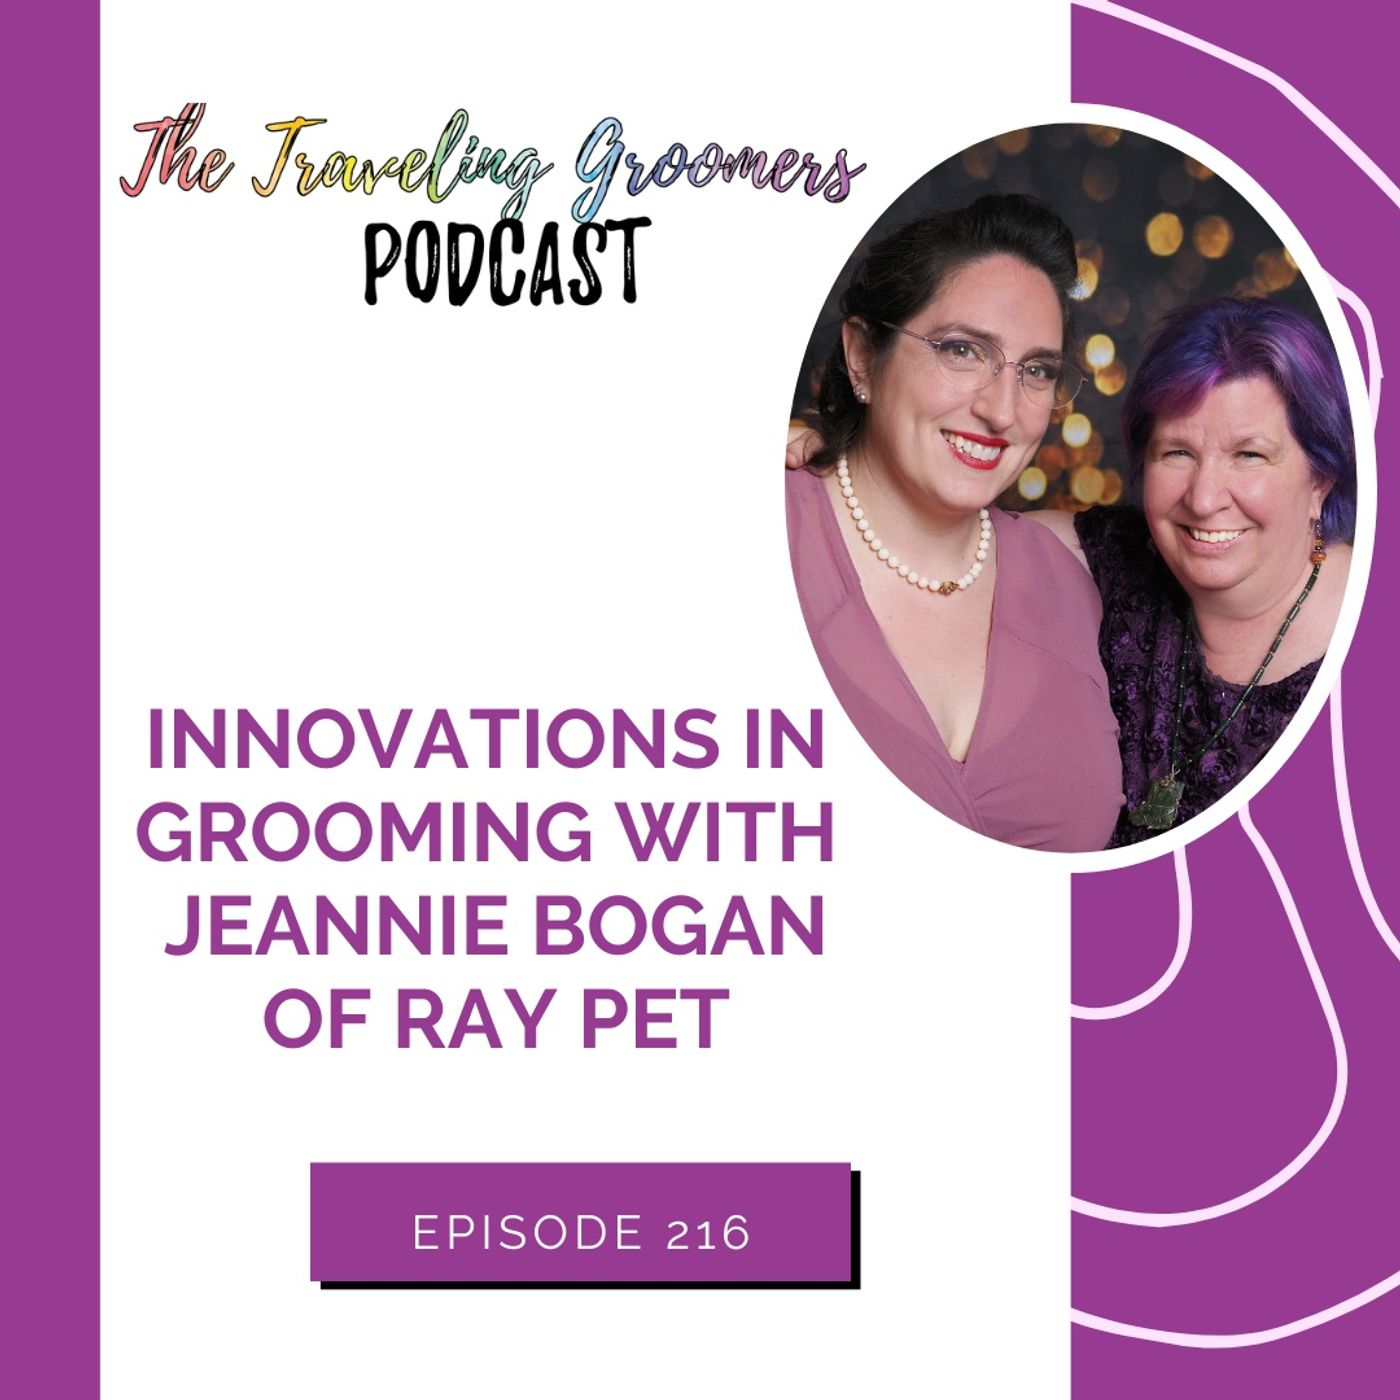 Innovations in Grooming  with Jeannie Bogan  from RayPet